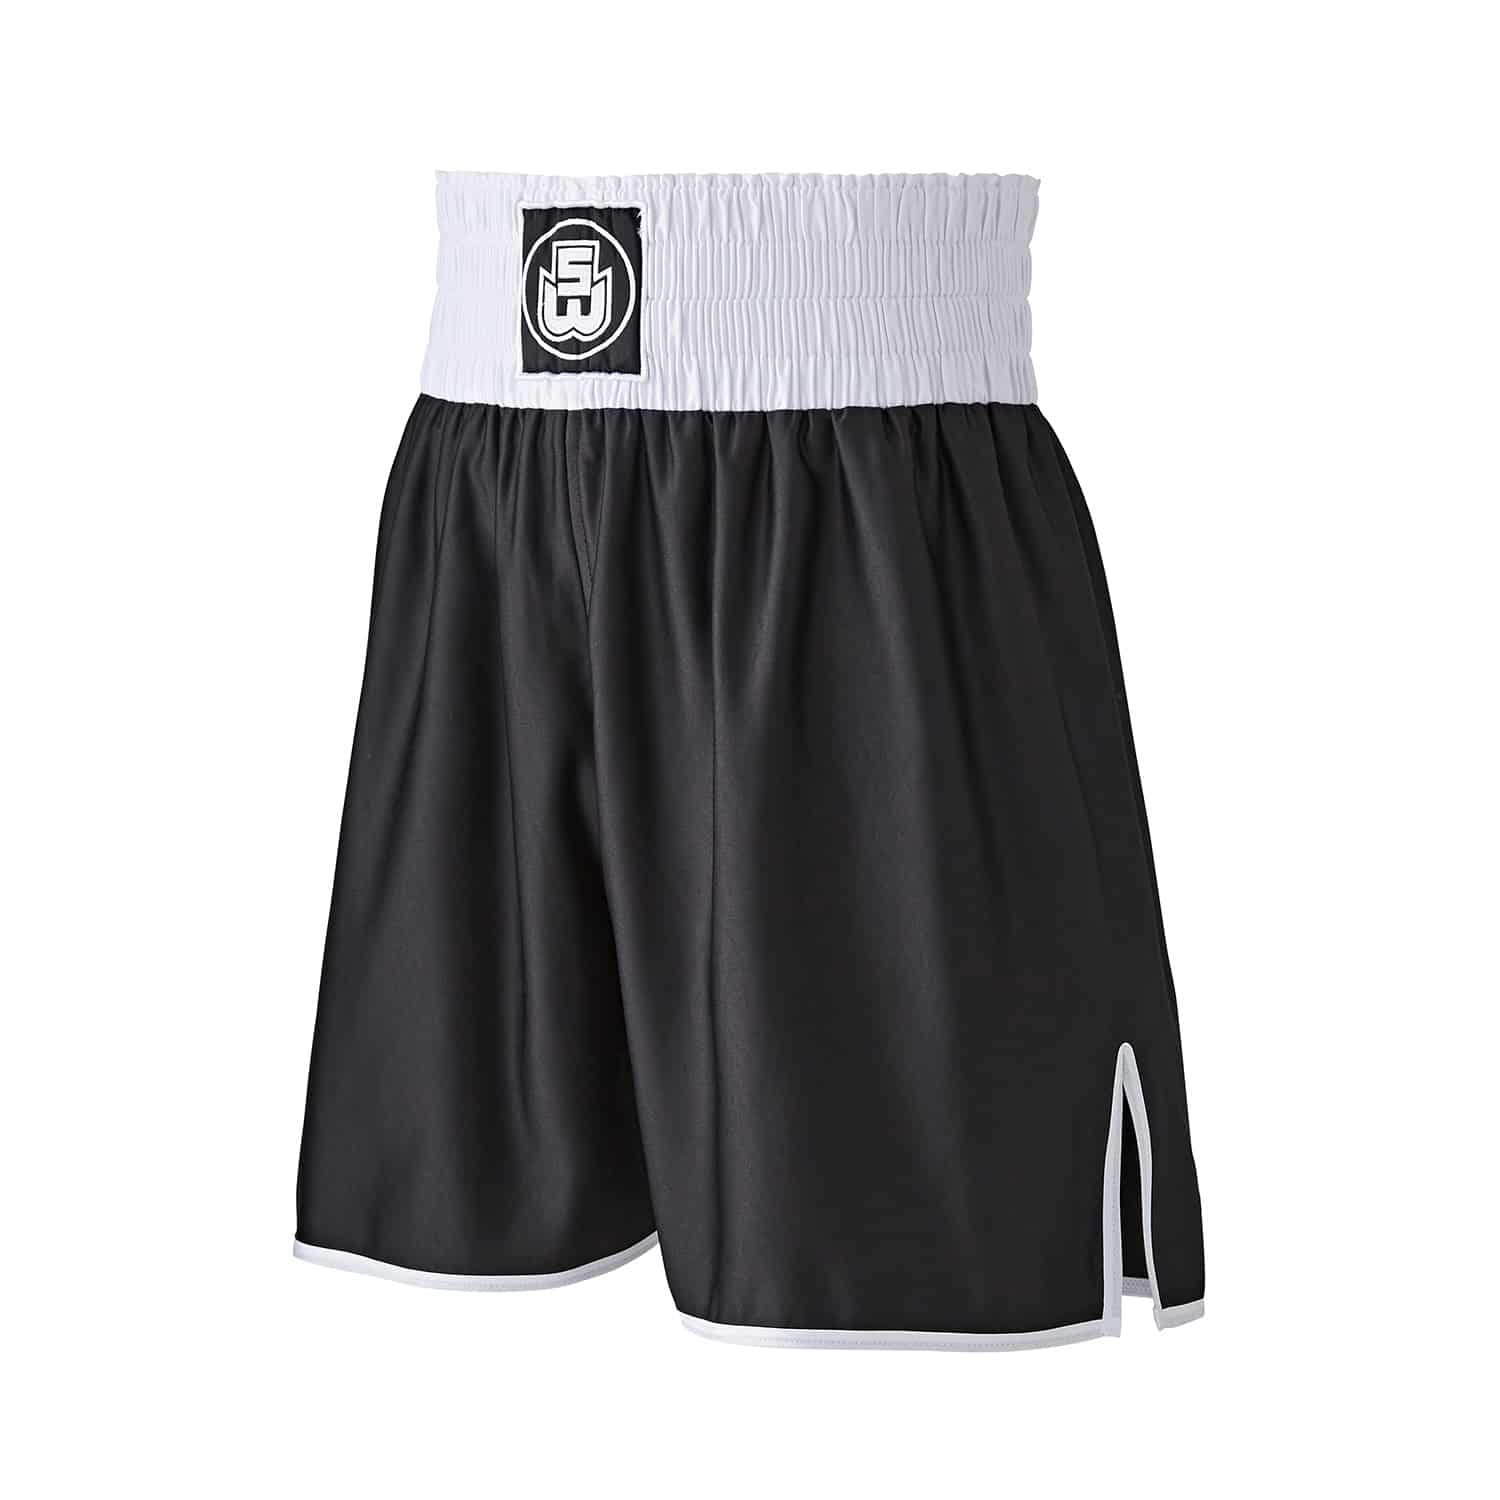 Mens Boxing Shorts, Handmade in the UK, Customise Online Today